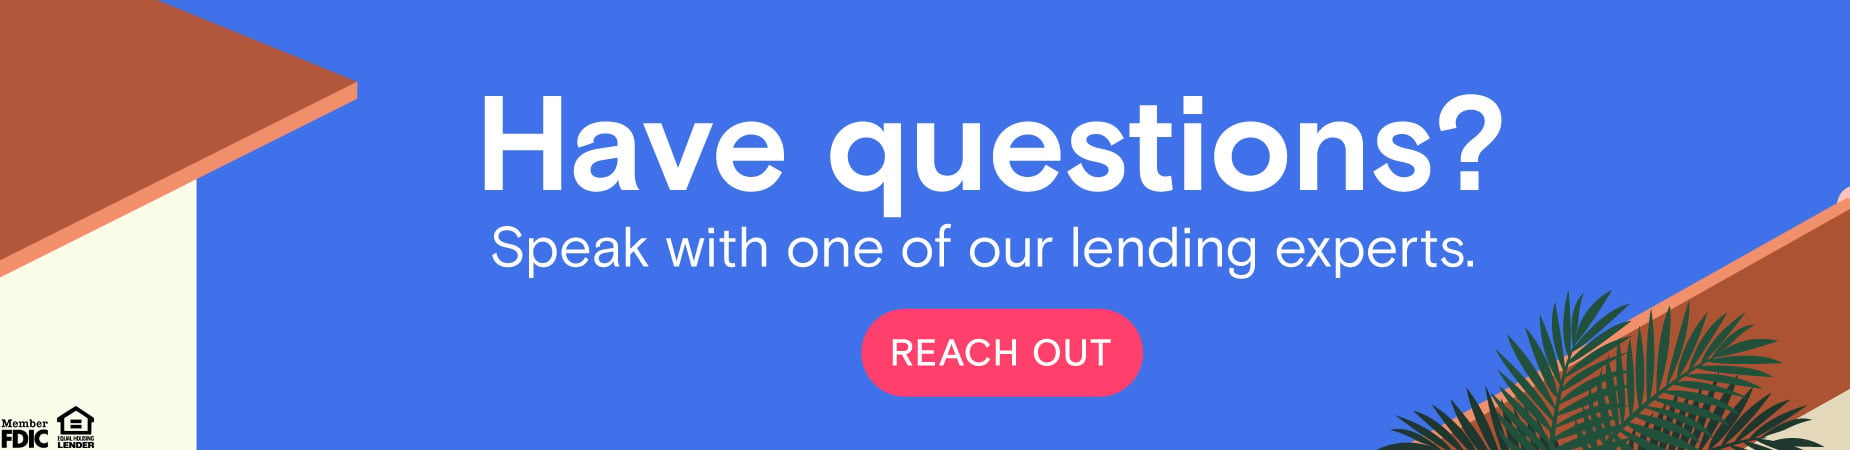 Have questions? Reach out to one of our lending experts.